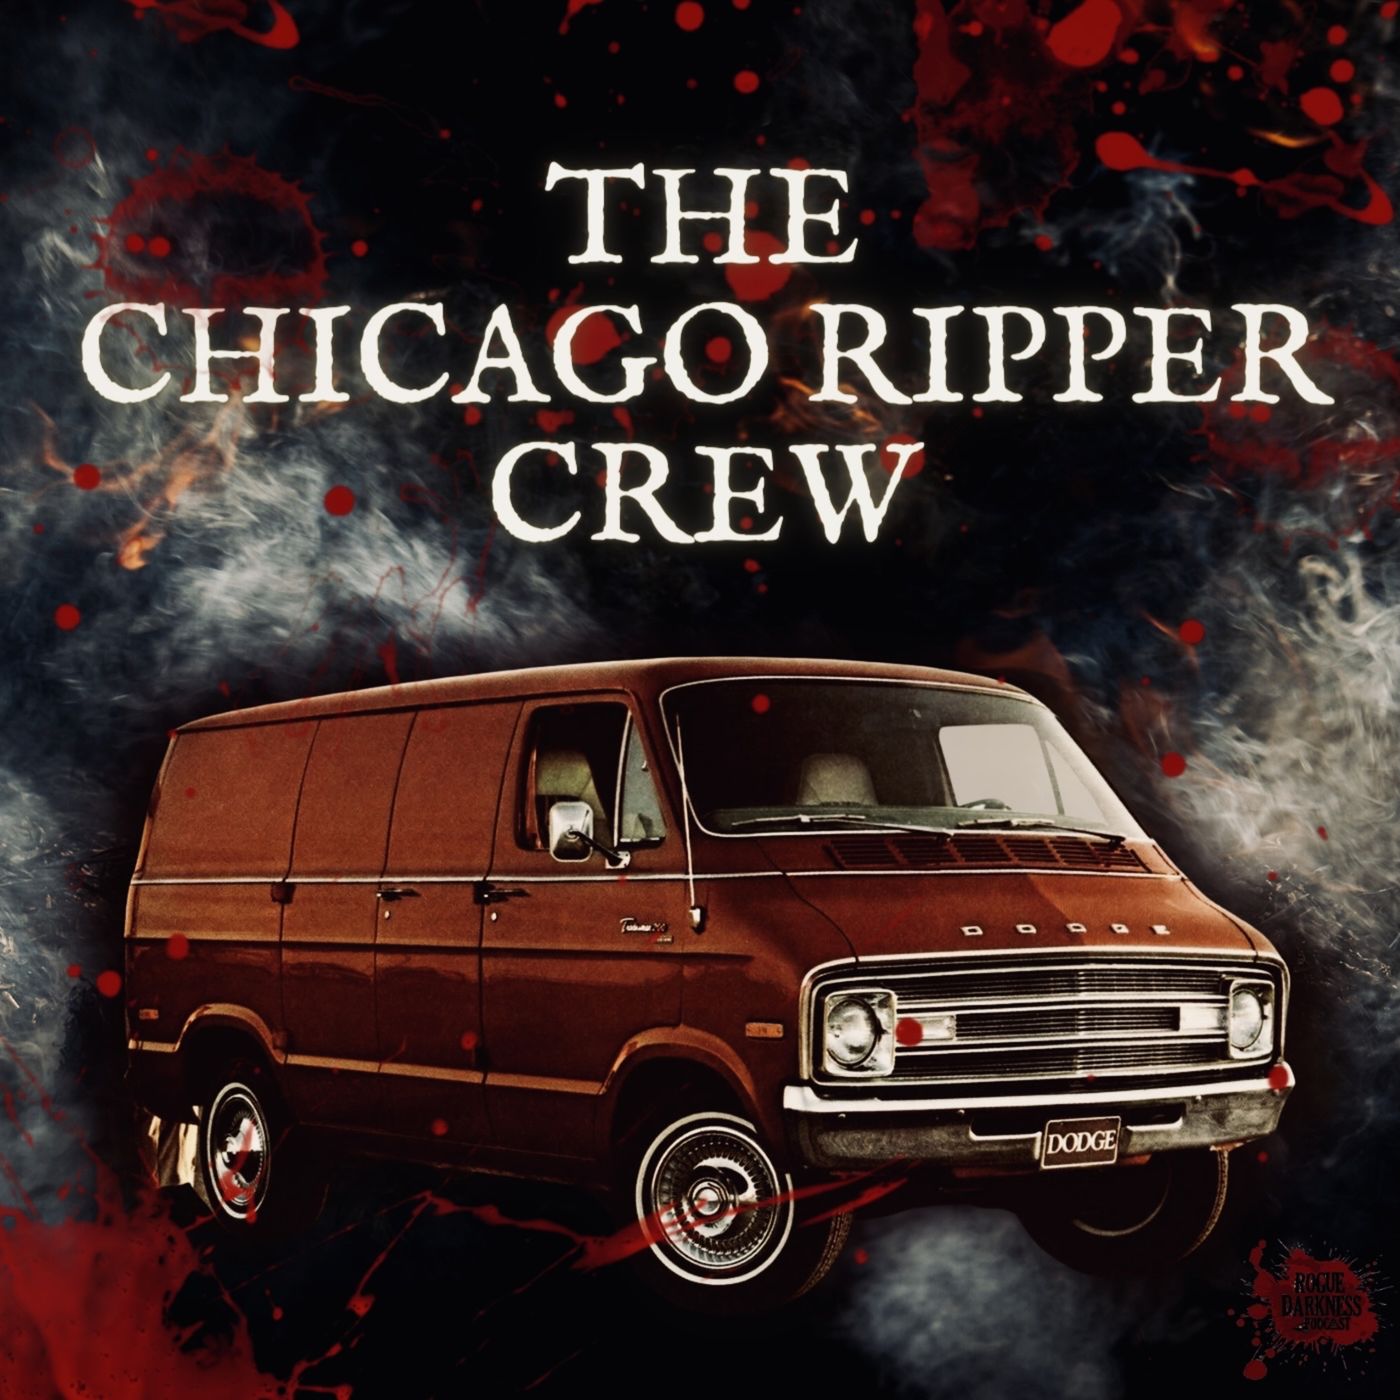 LIX: The Chicago Ripper Crew